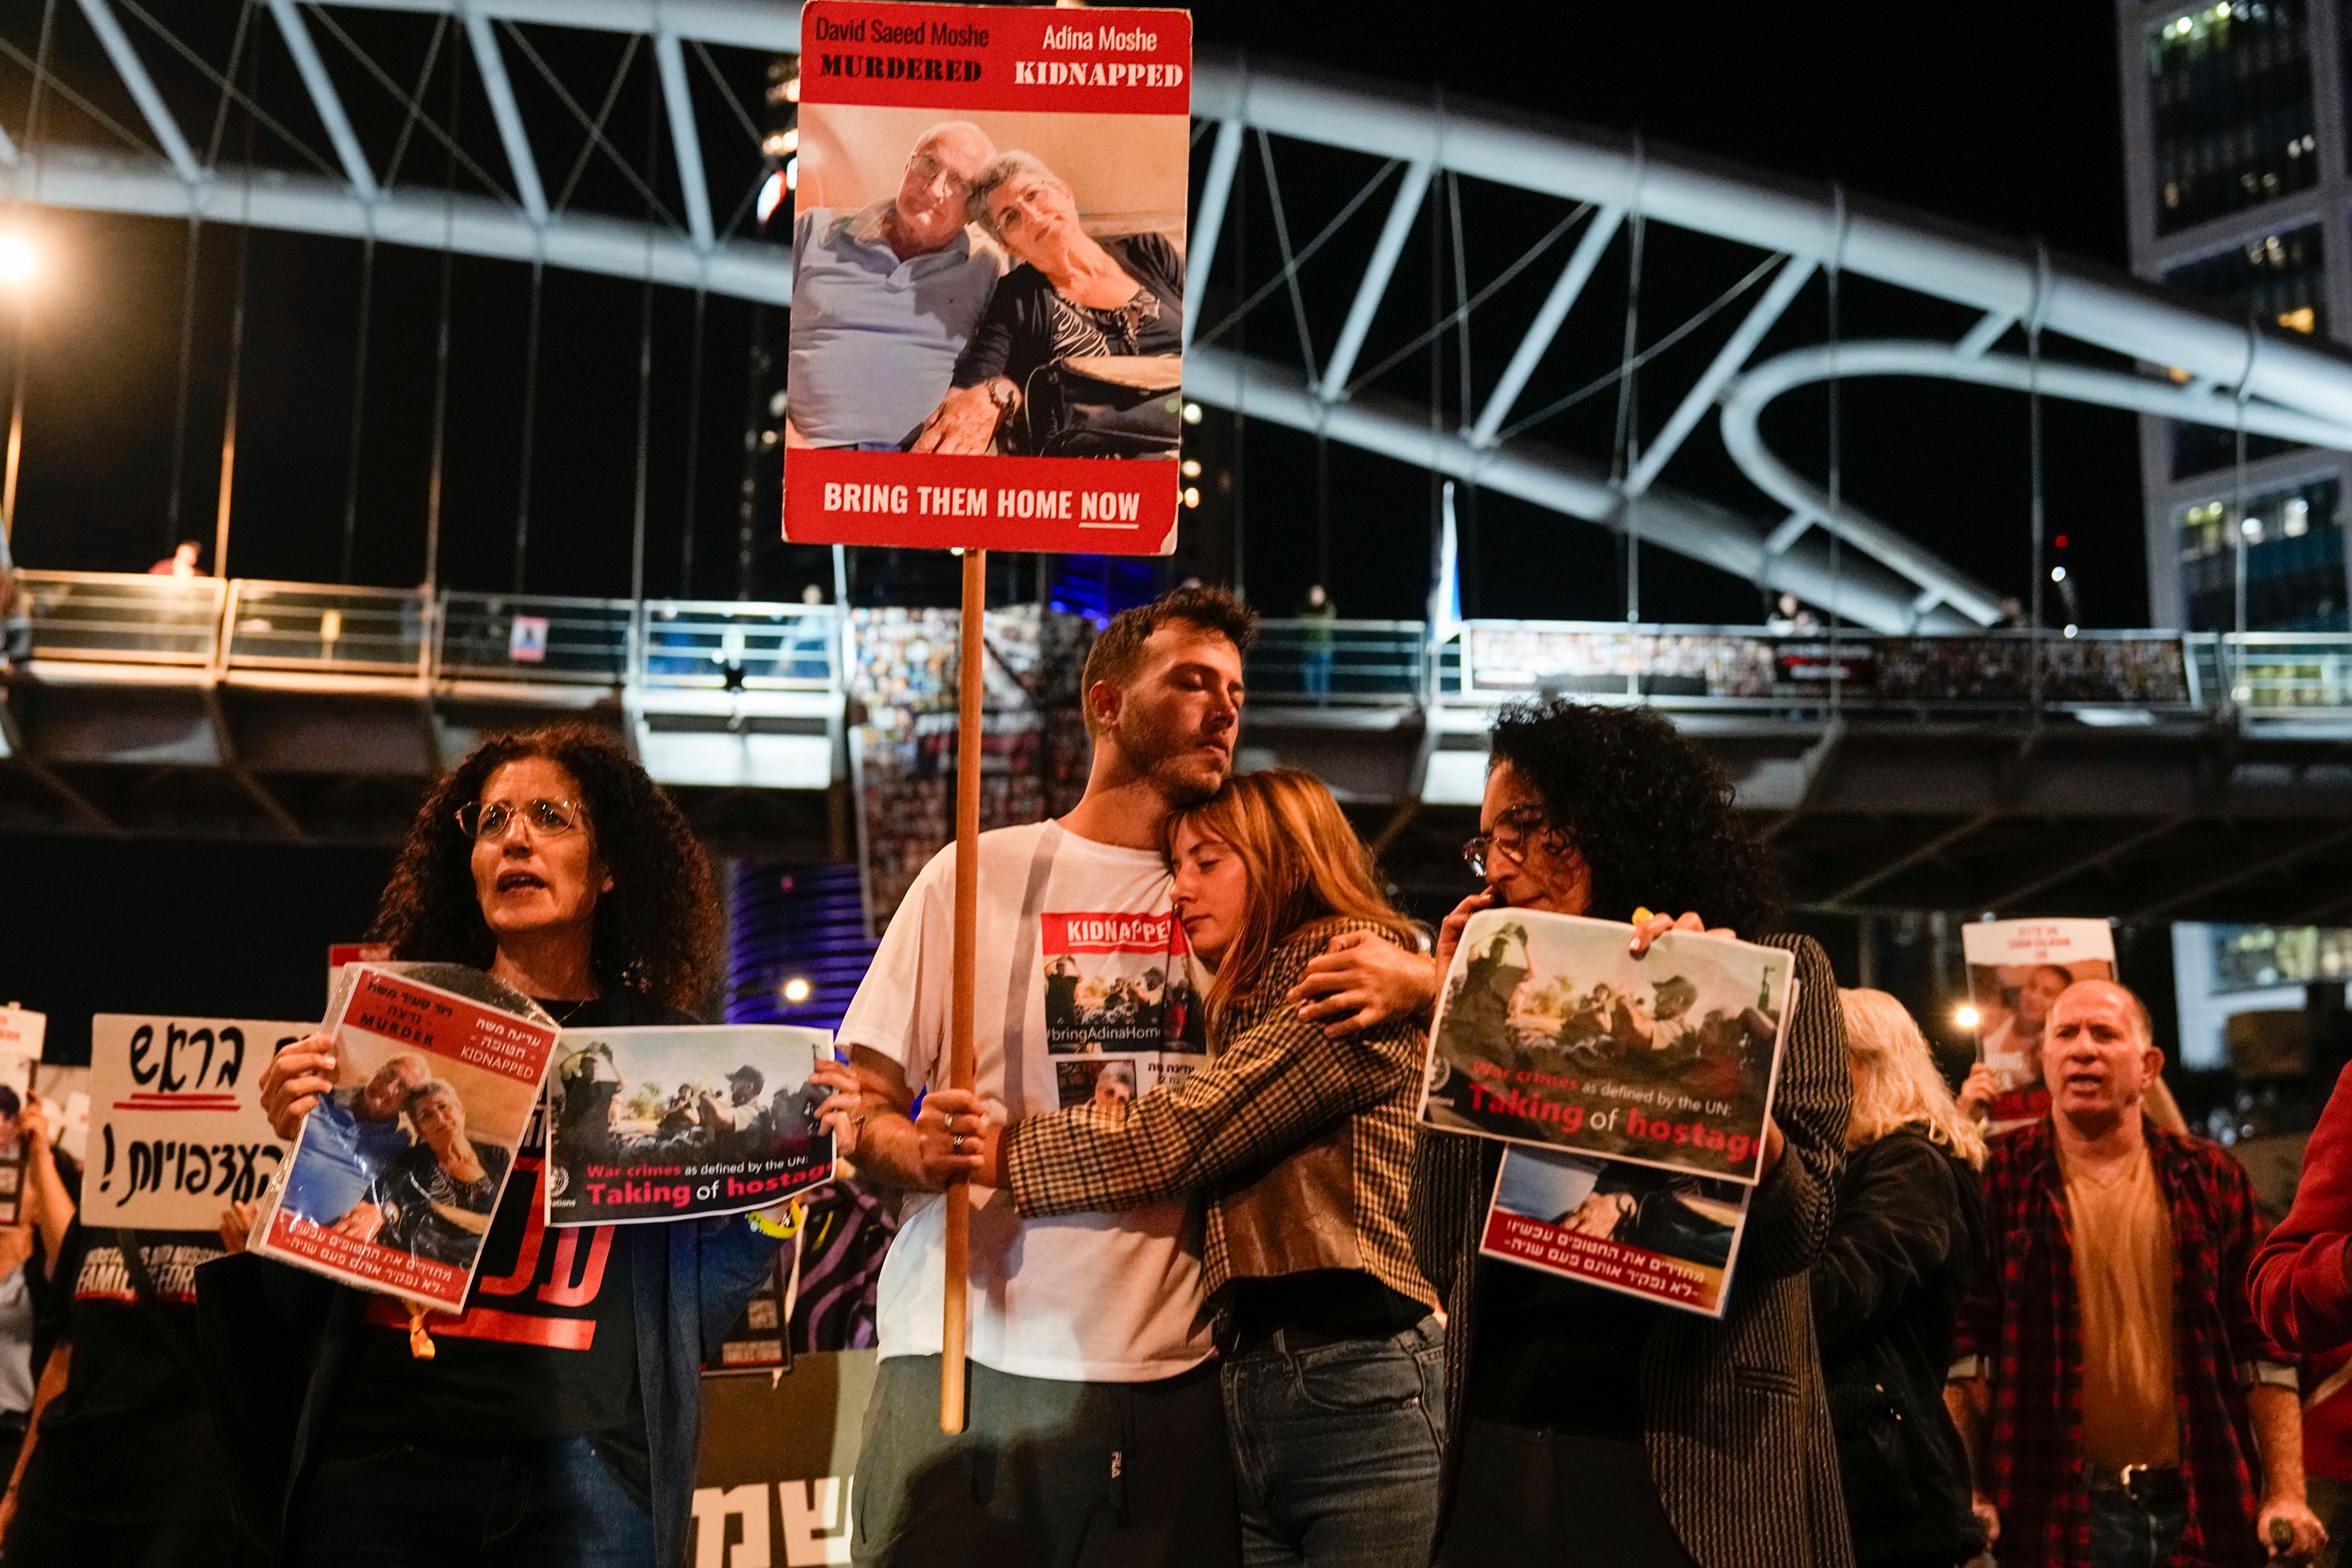 Families and friends of about 240 hostages held by Hamas in Gaza call for Israeli Prime Minister Benjamin Netanyahu to bring them home during a demonstration in Tel Aviv, Israel, on November 21.